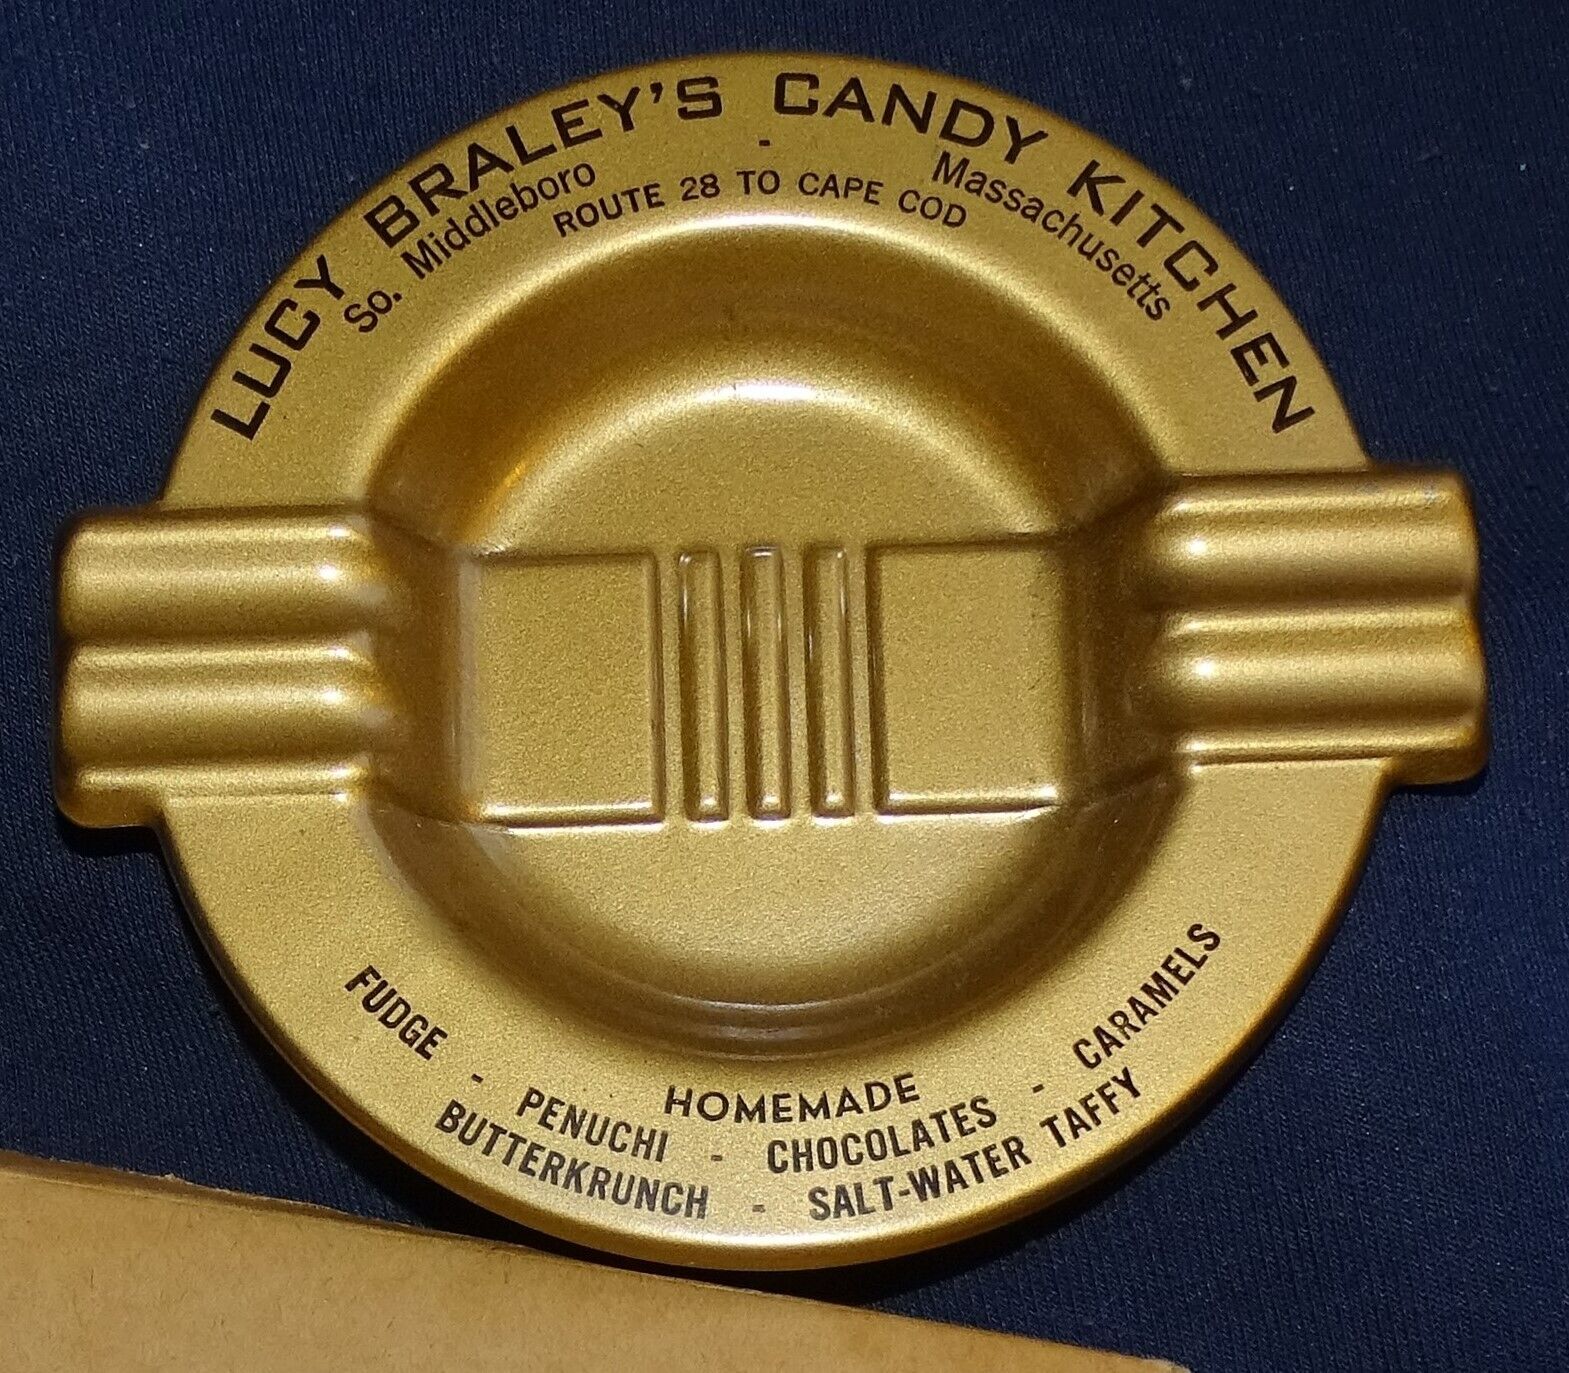 Lucy Braley's Candy Kitchen So. Middleboro MA. Pressed Steel Ashtray in orig box